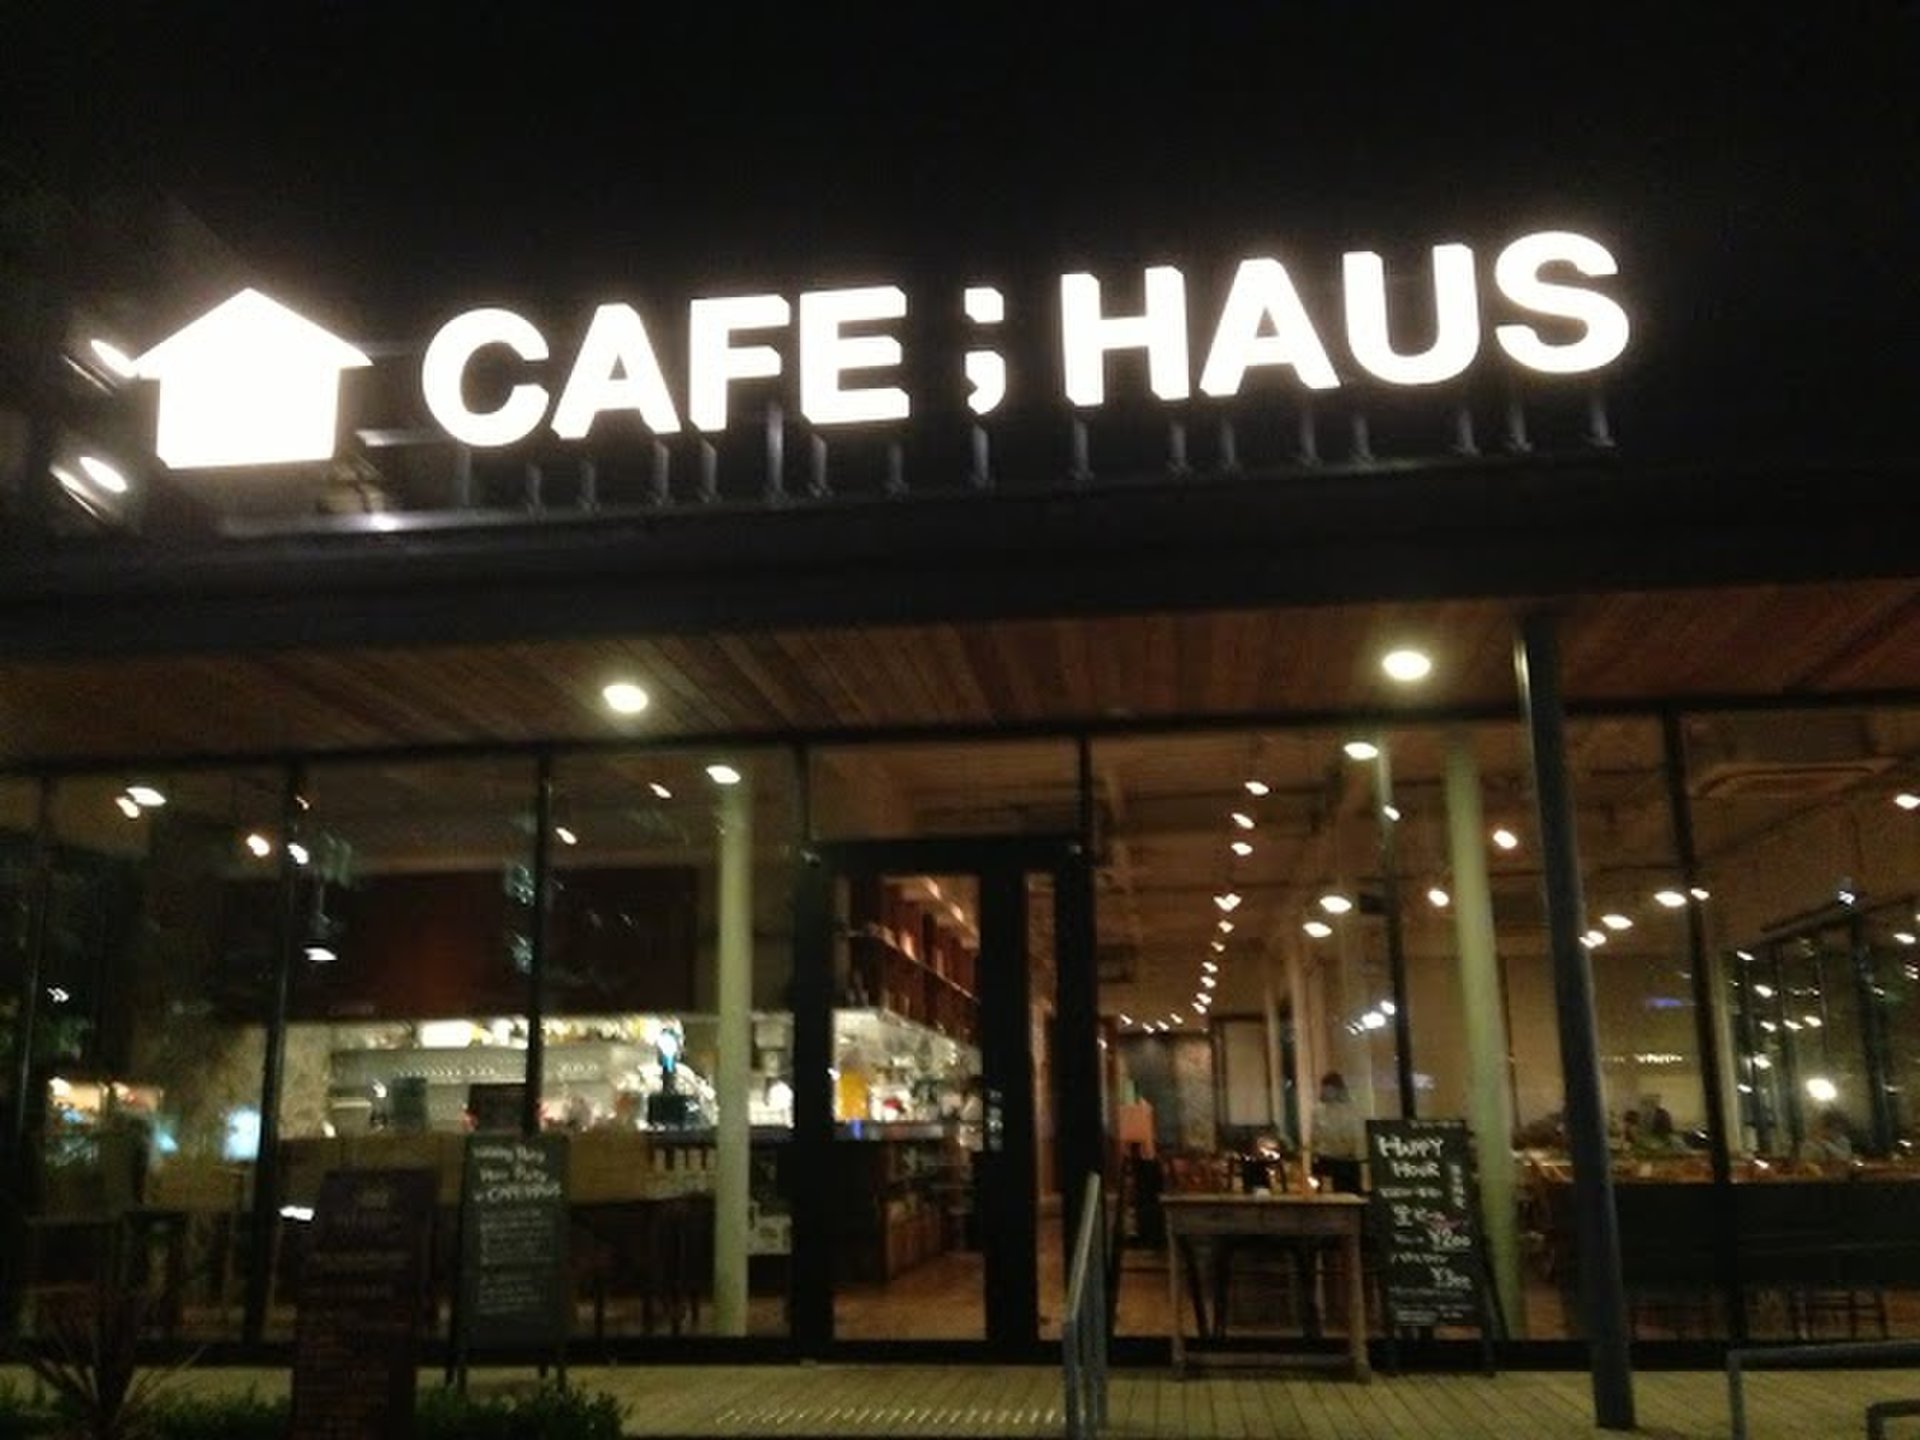 CAFE;HAUS（カフェハウス）